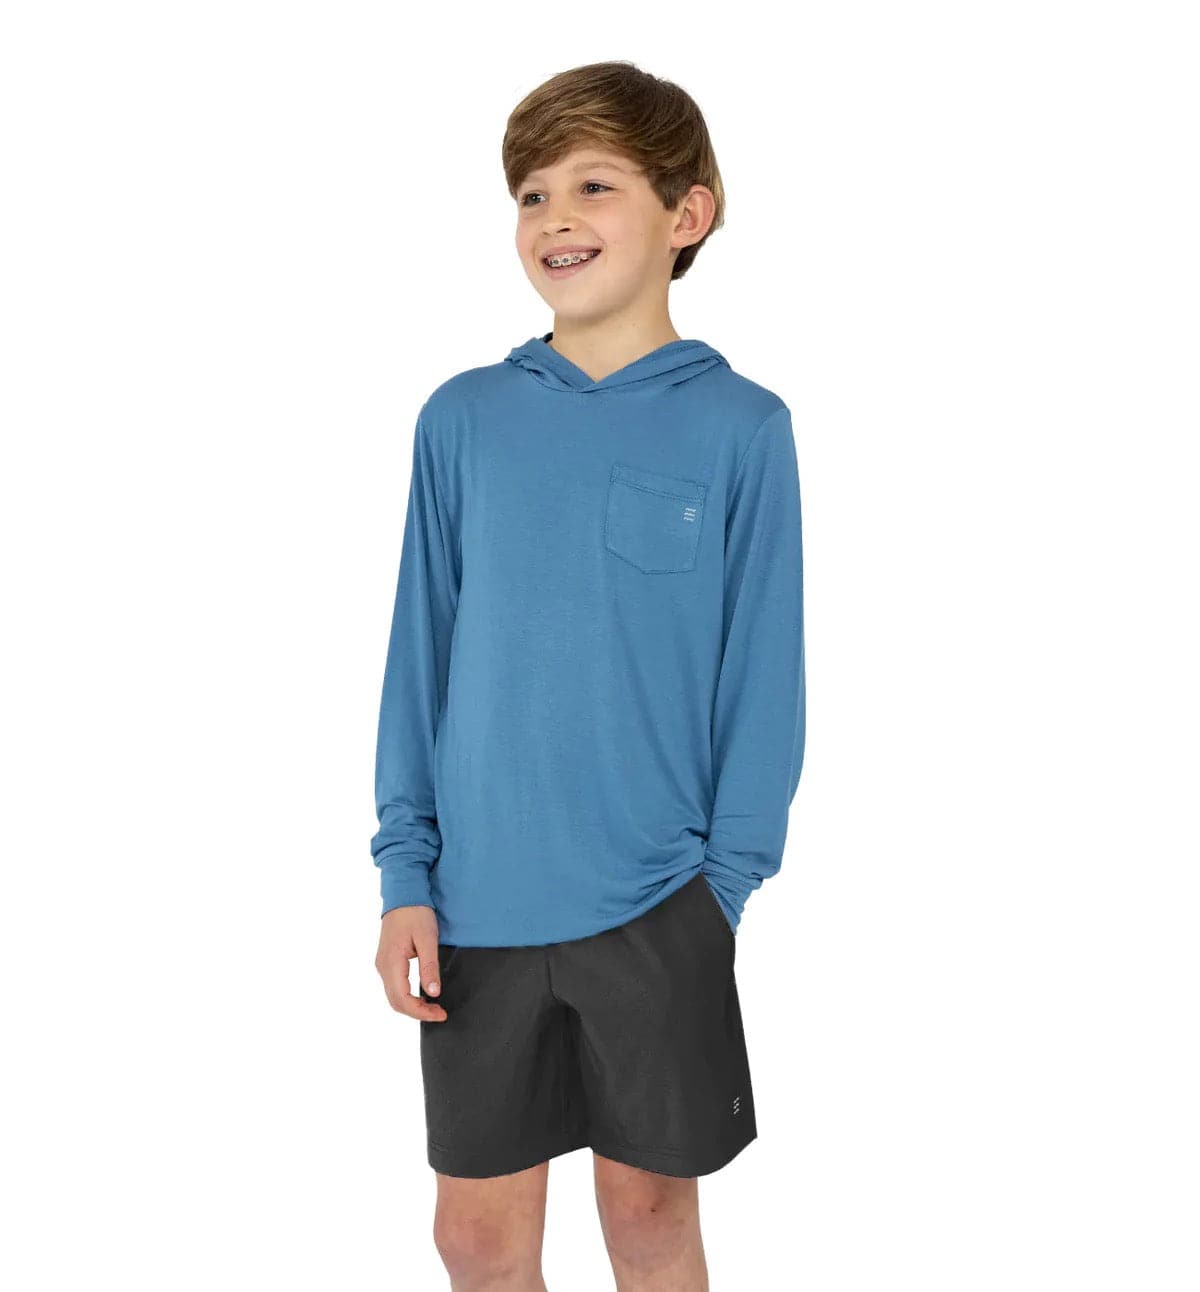 Featuring the Boys' Breeze Short kid's and babies, kid's thermal layering manufactured by Free Fly shown here from one angle.